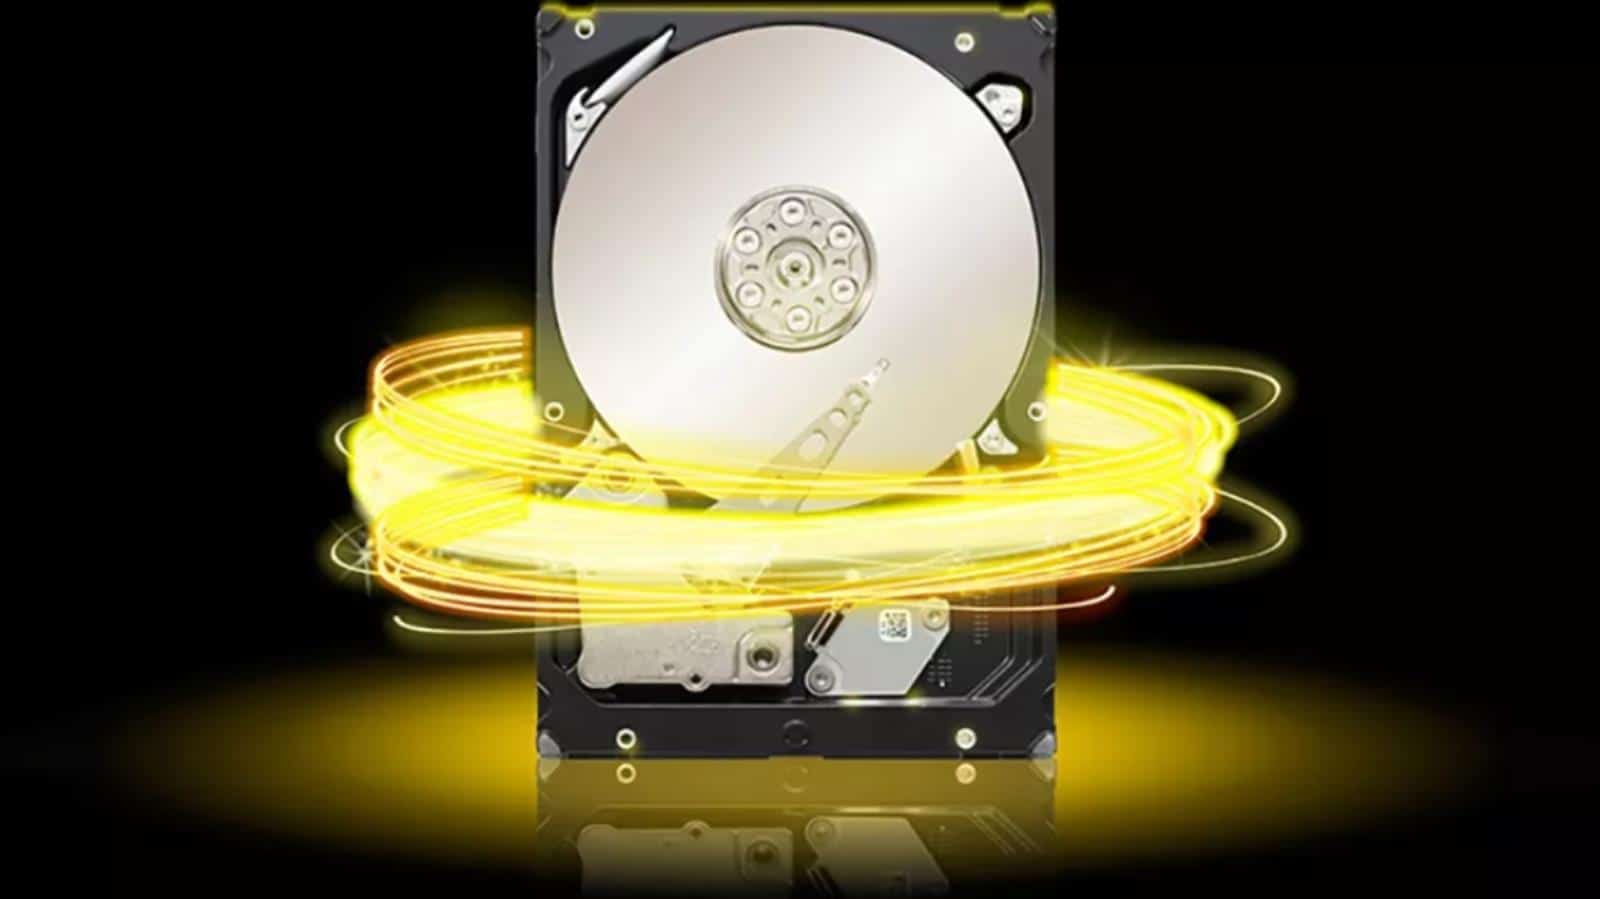 Here is the first PCIe NVMe HDD.  Seagate showed off a unique plate disc